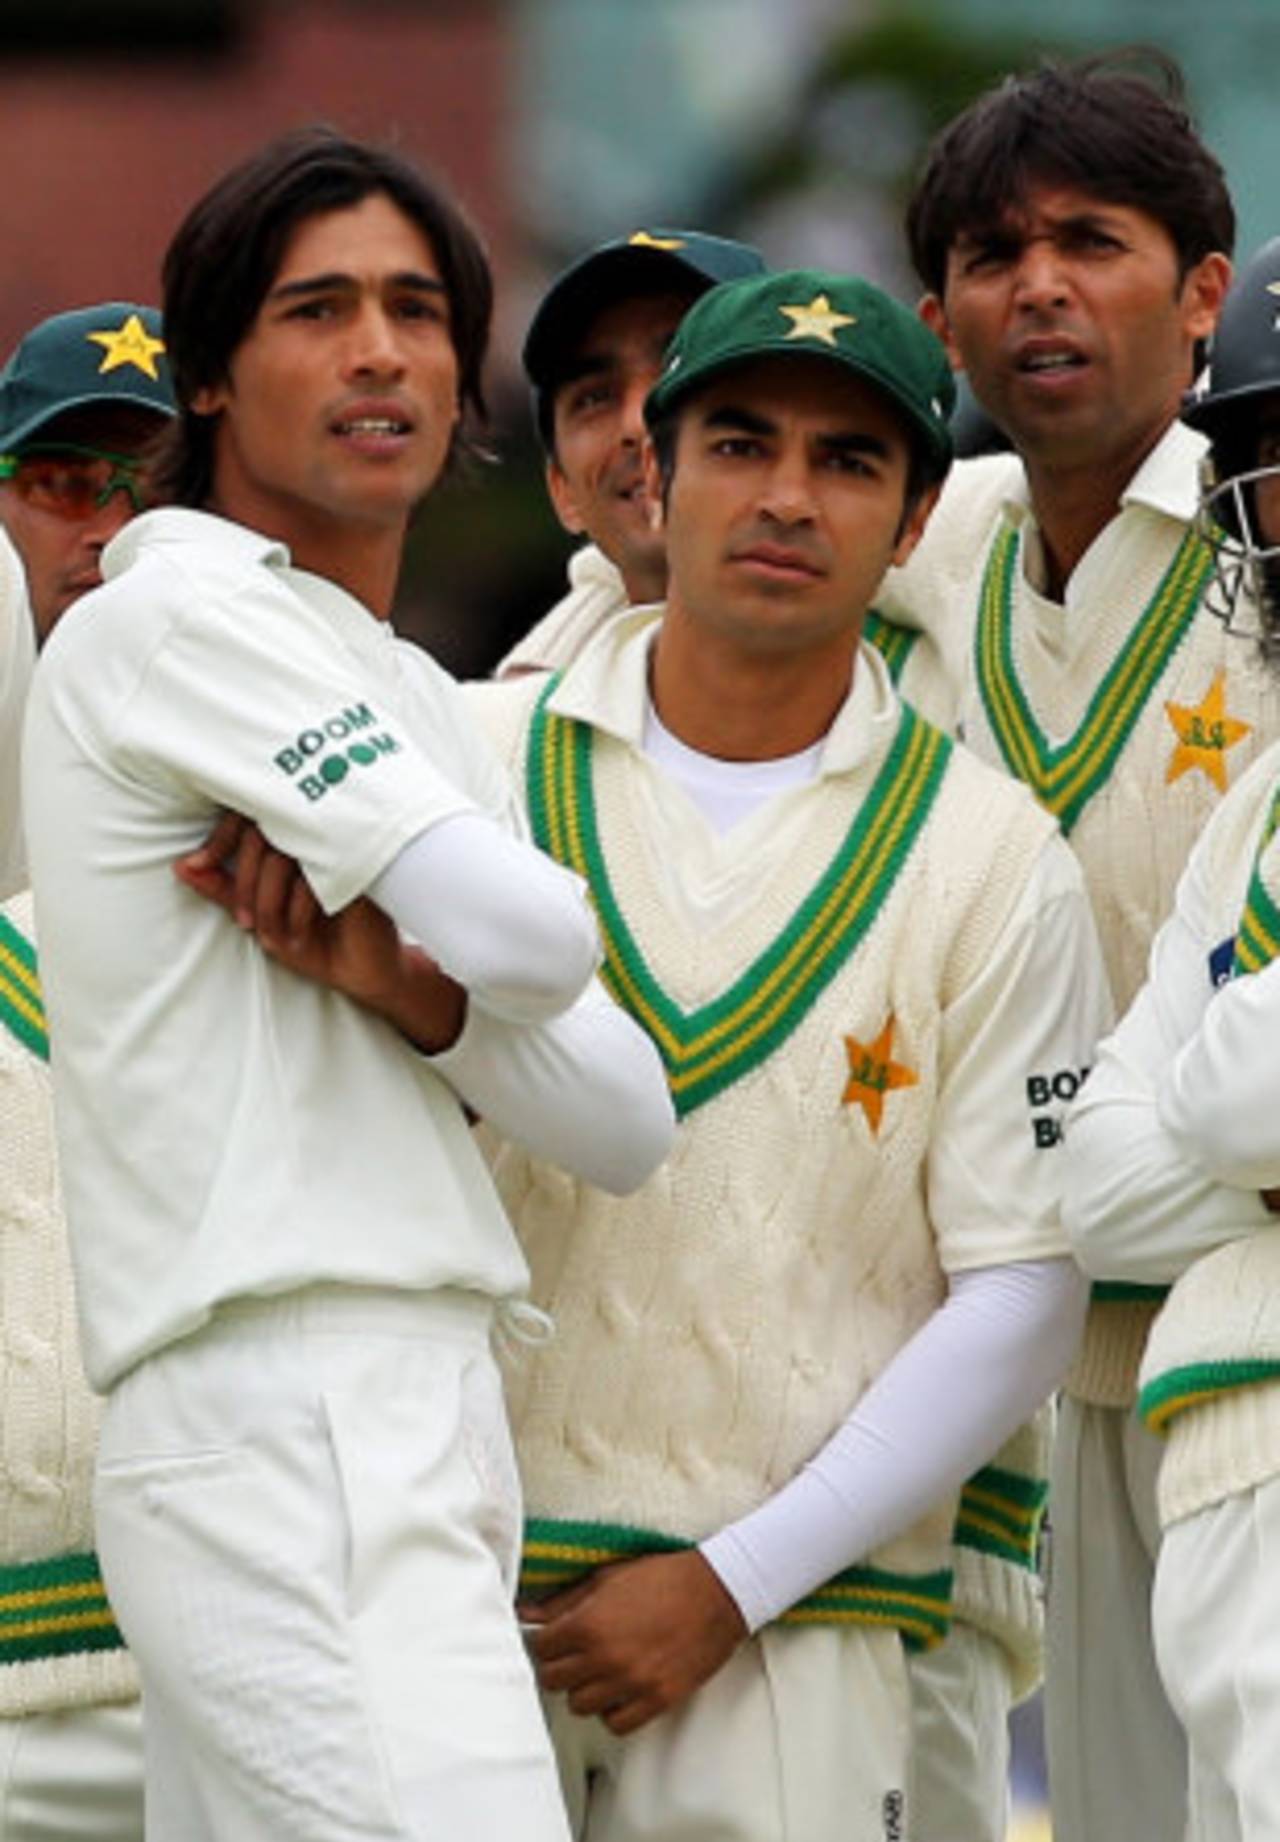 Mohammad Amir, Salman Butt and Mohammad Asif look on, Lord's, August 27, 2010